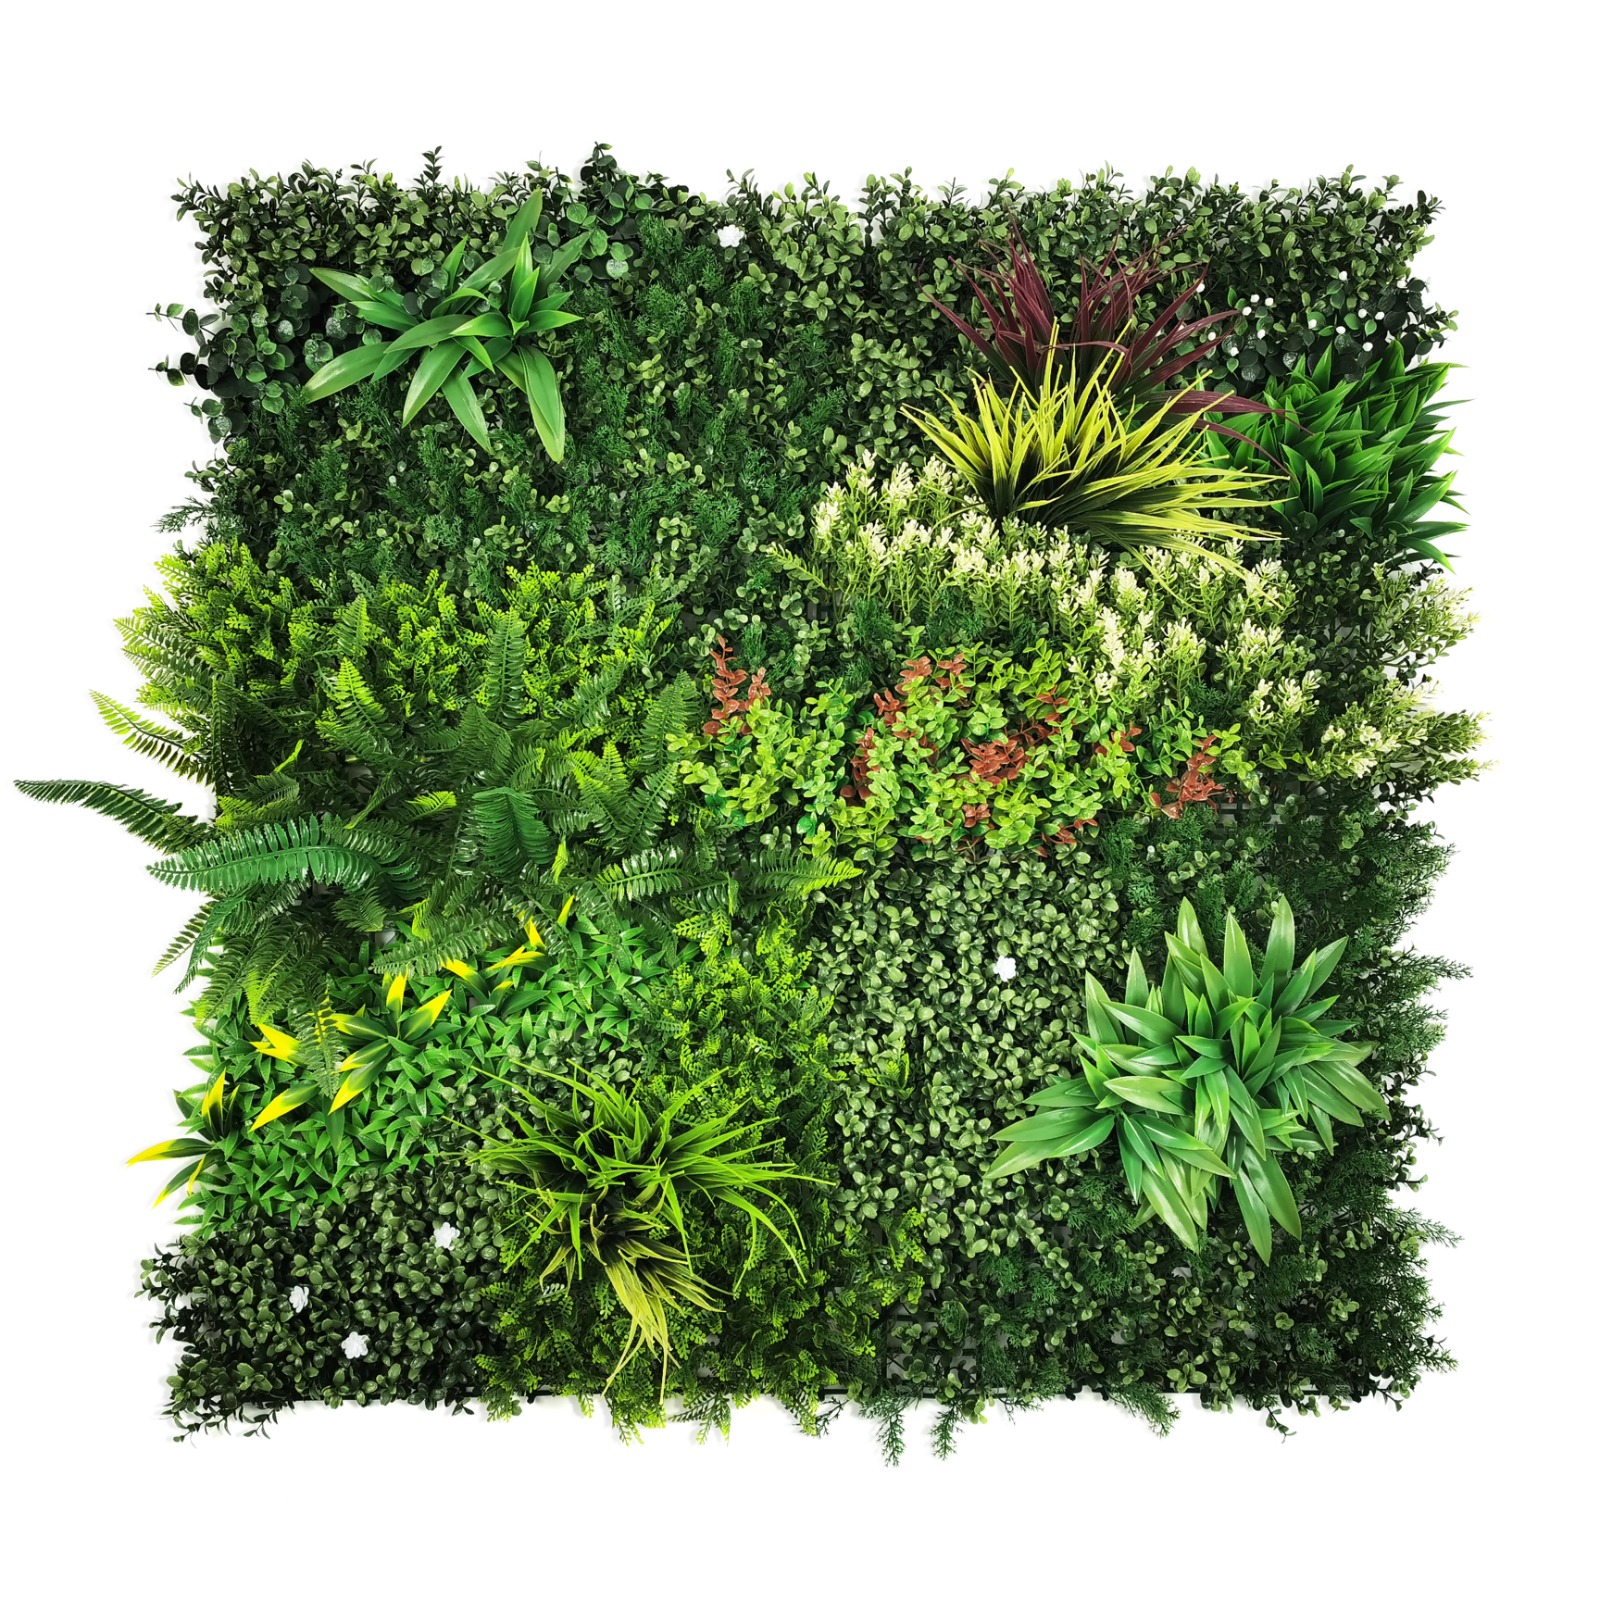 Wall Grass - COLOR MEADOW (1mtr × 1mtr, 10.764sft)